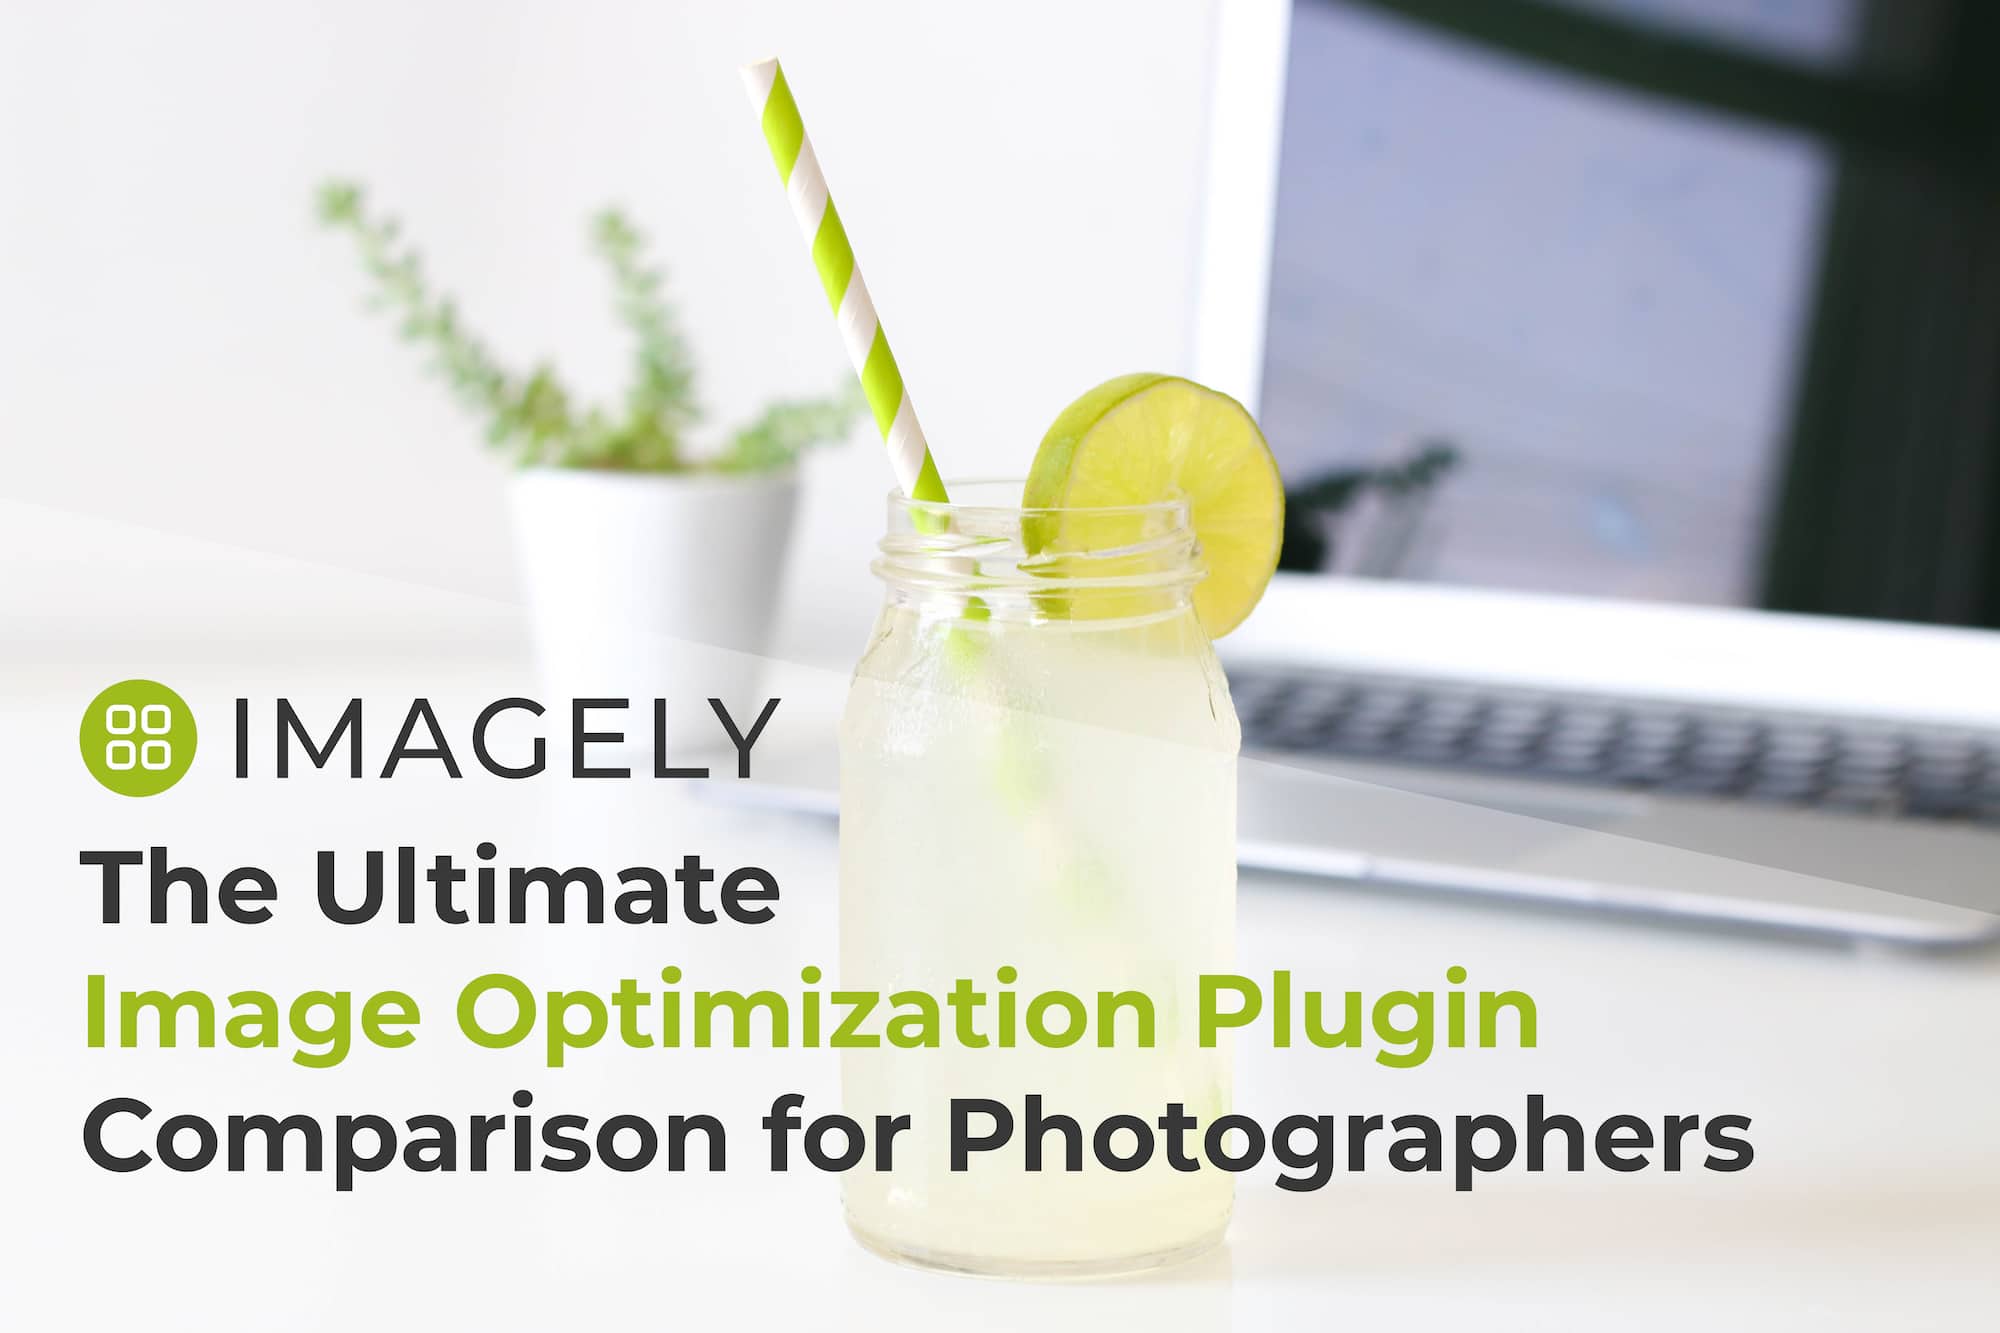 There are a variety of ways to optimize your images for the web. Two of the most popular and effective methods are compressing images and using lazy loading. Both of these tasks can be achieved using a plugin such as WP Smush, Imagify or ShortPixel: